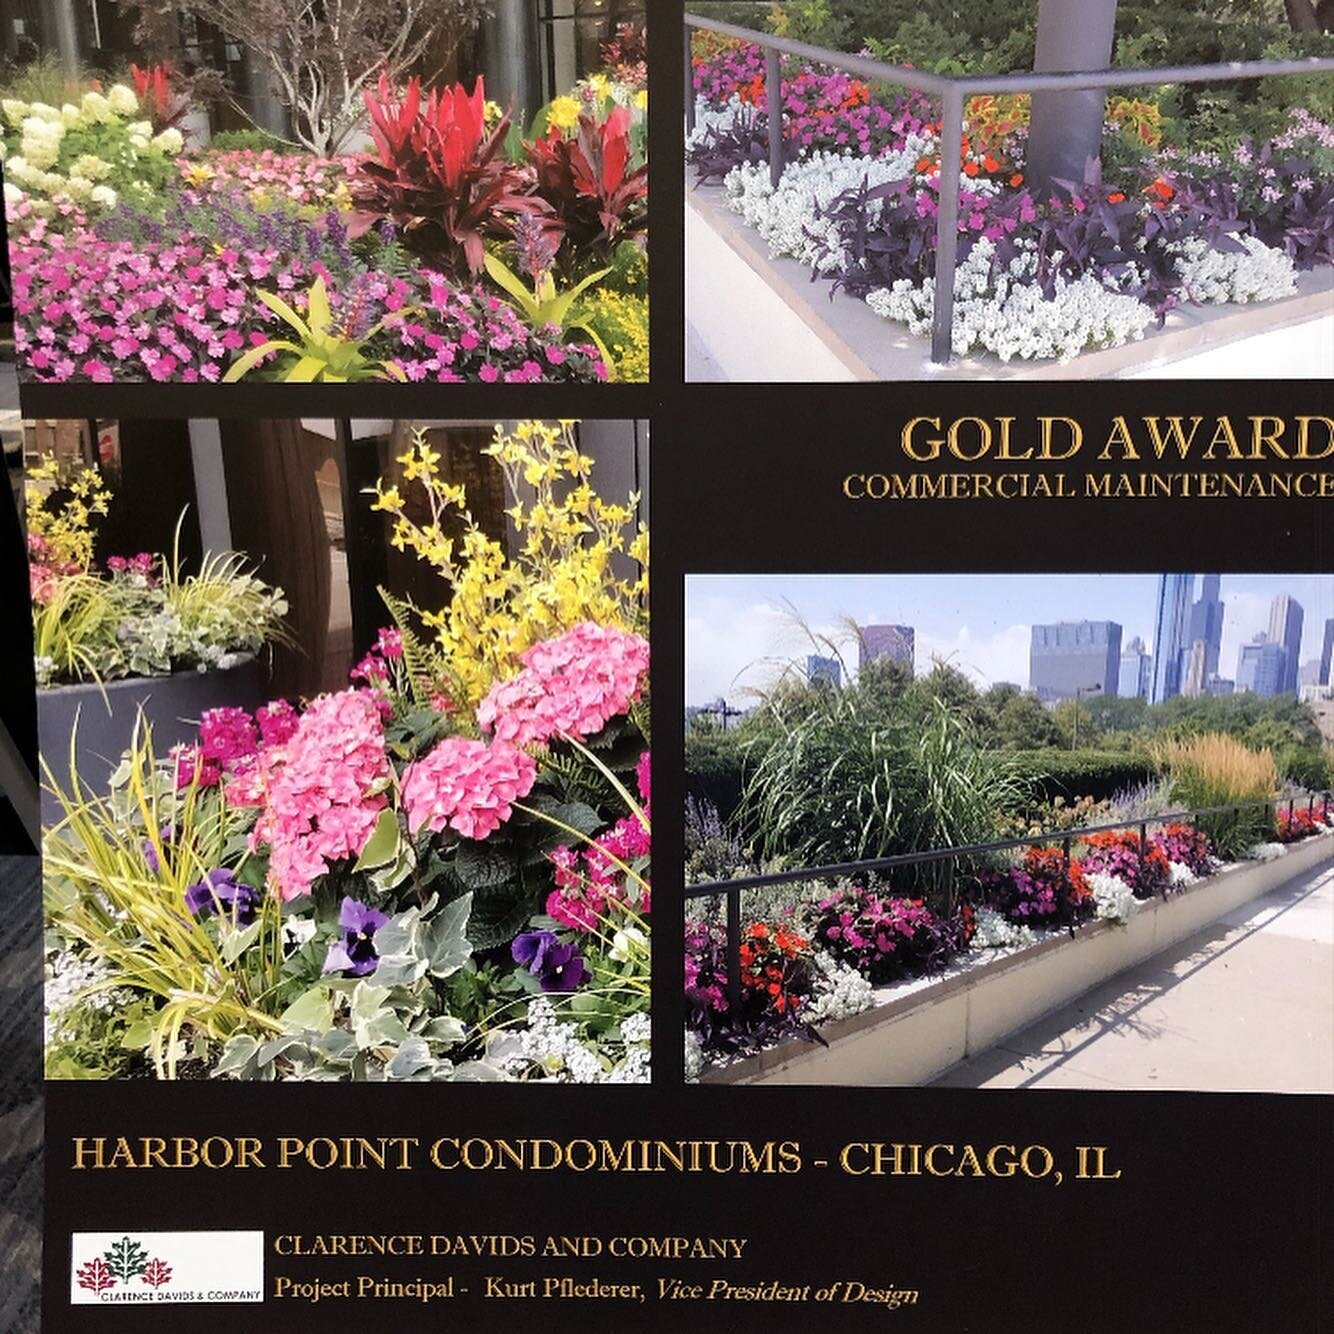 A few of the award winning projects we took part in from the iLandscape show 
#ilandscape #ilandscape2020 #ilca #illinois #wisconsin #greenindustry #landscape #landscapedesign #silveraward #goldaward #project